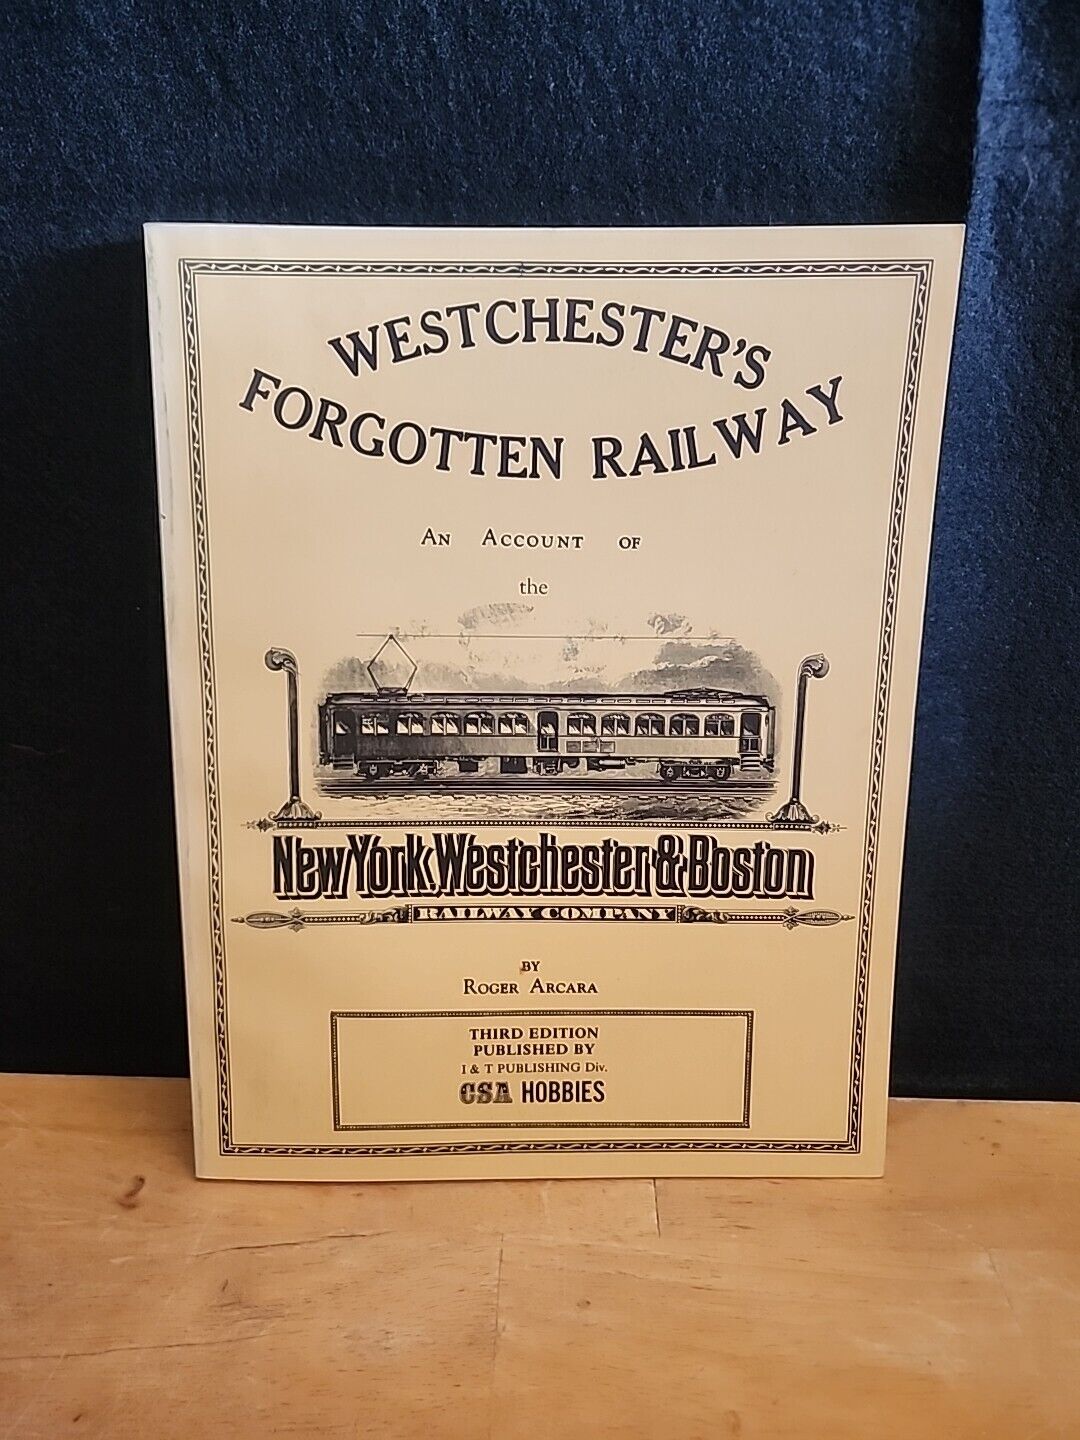 Westchester\'s Forgotten Railway By Roger Arcara 1972 Revised and Epanded Edition